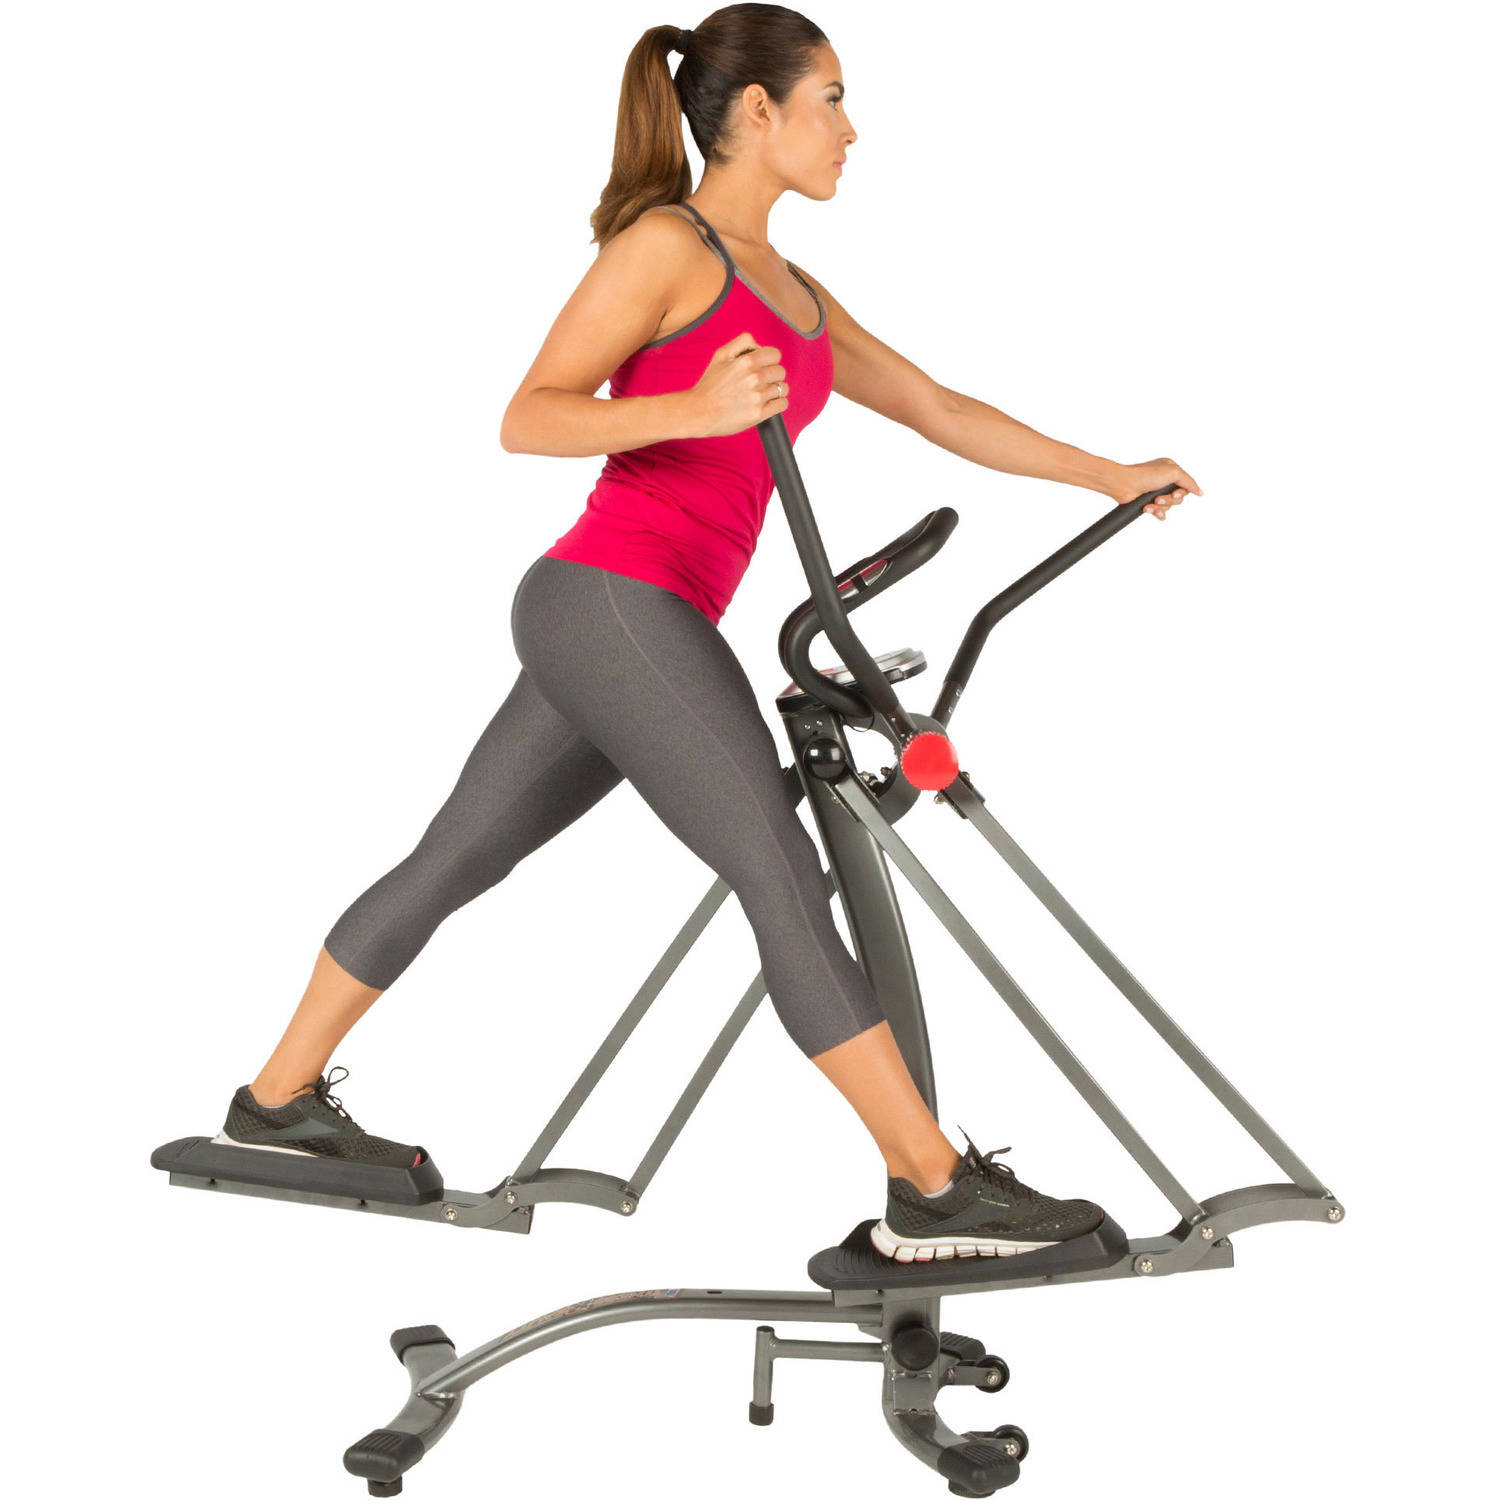 Fitness Reality Multi-Direction Elliptical Cloud Walker X1 with Pulse Sensors - image 12 of 31